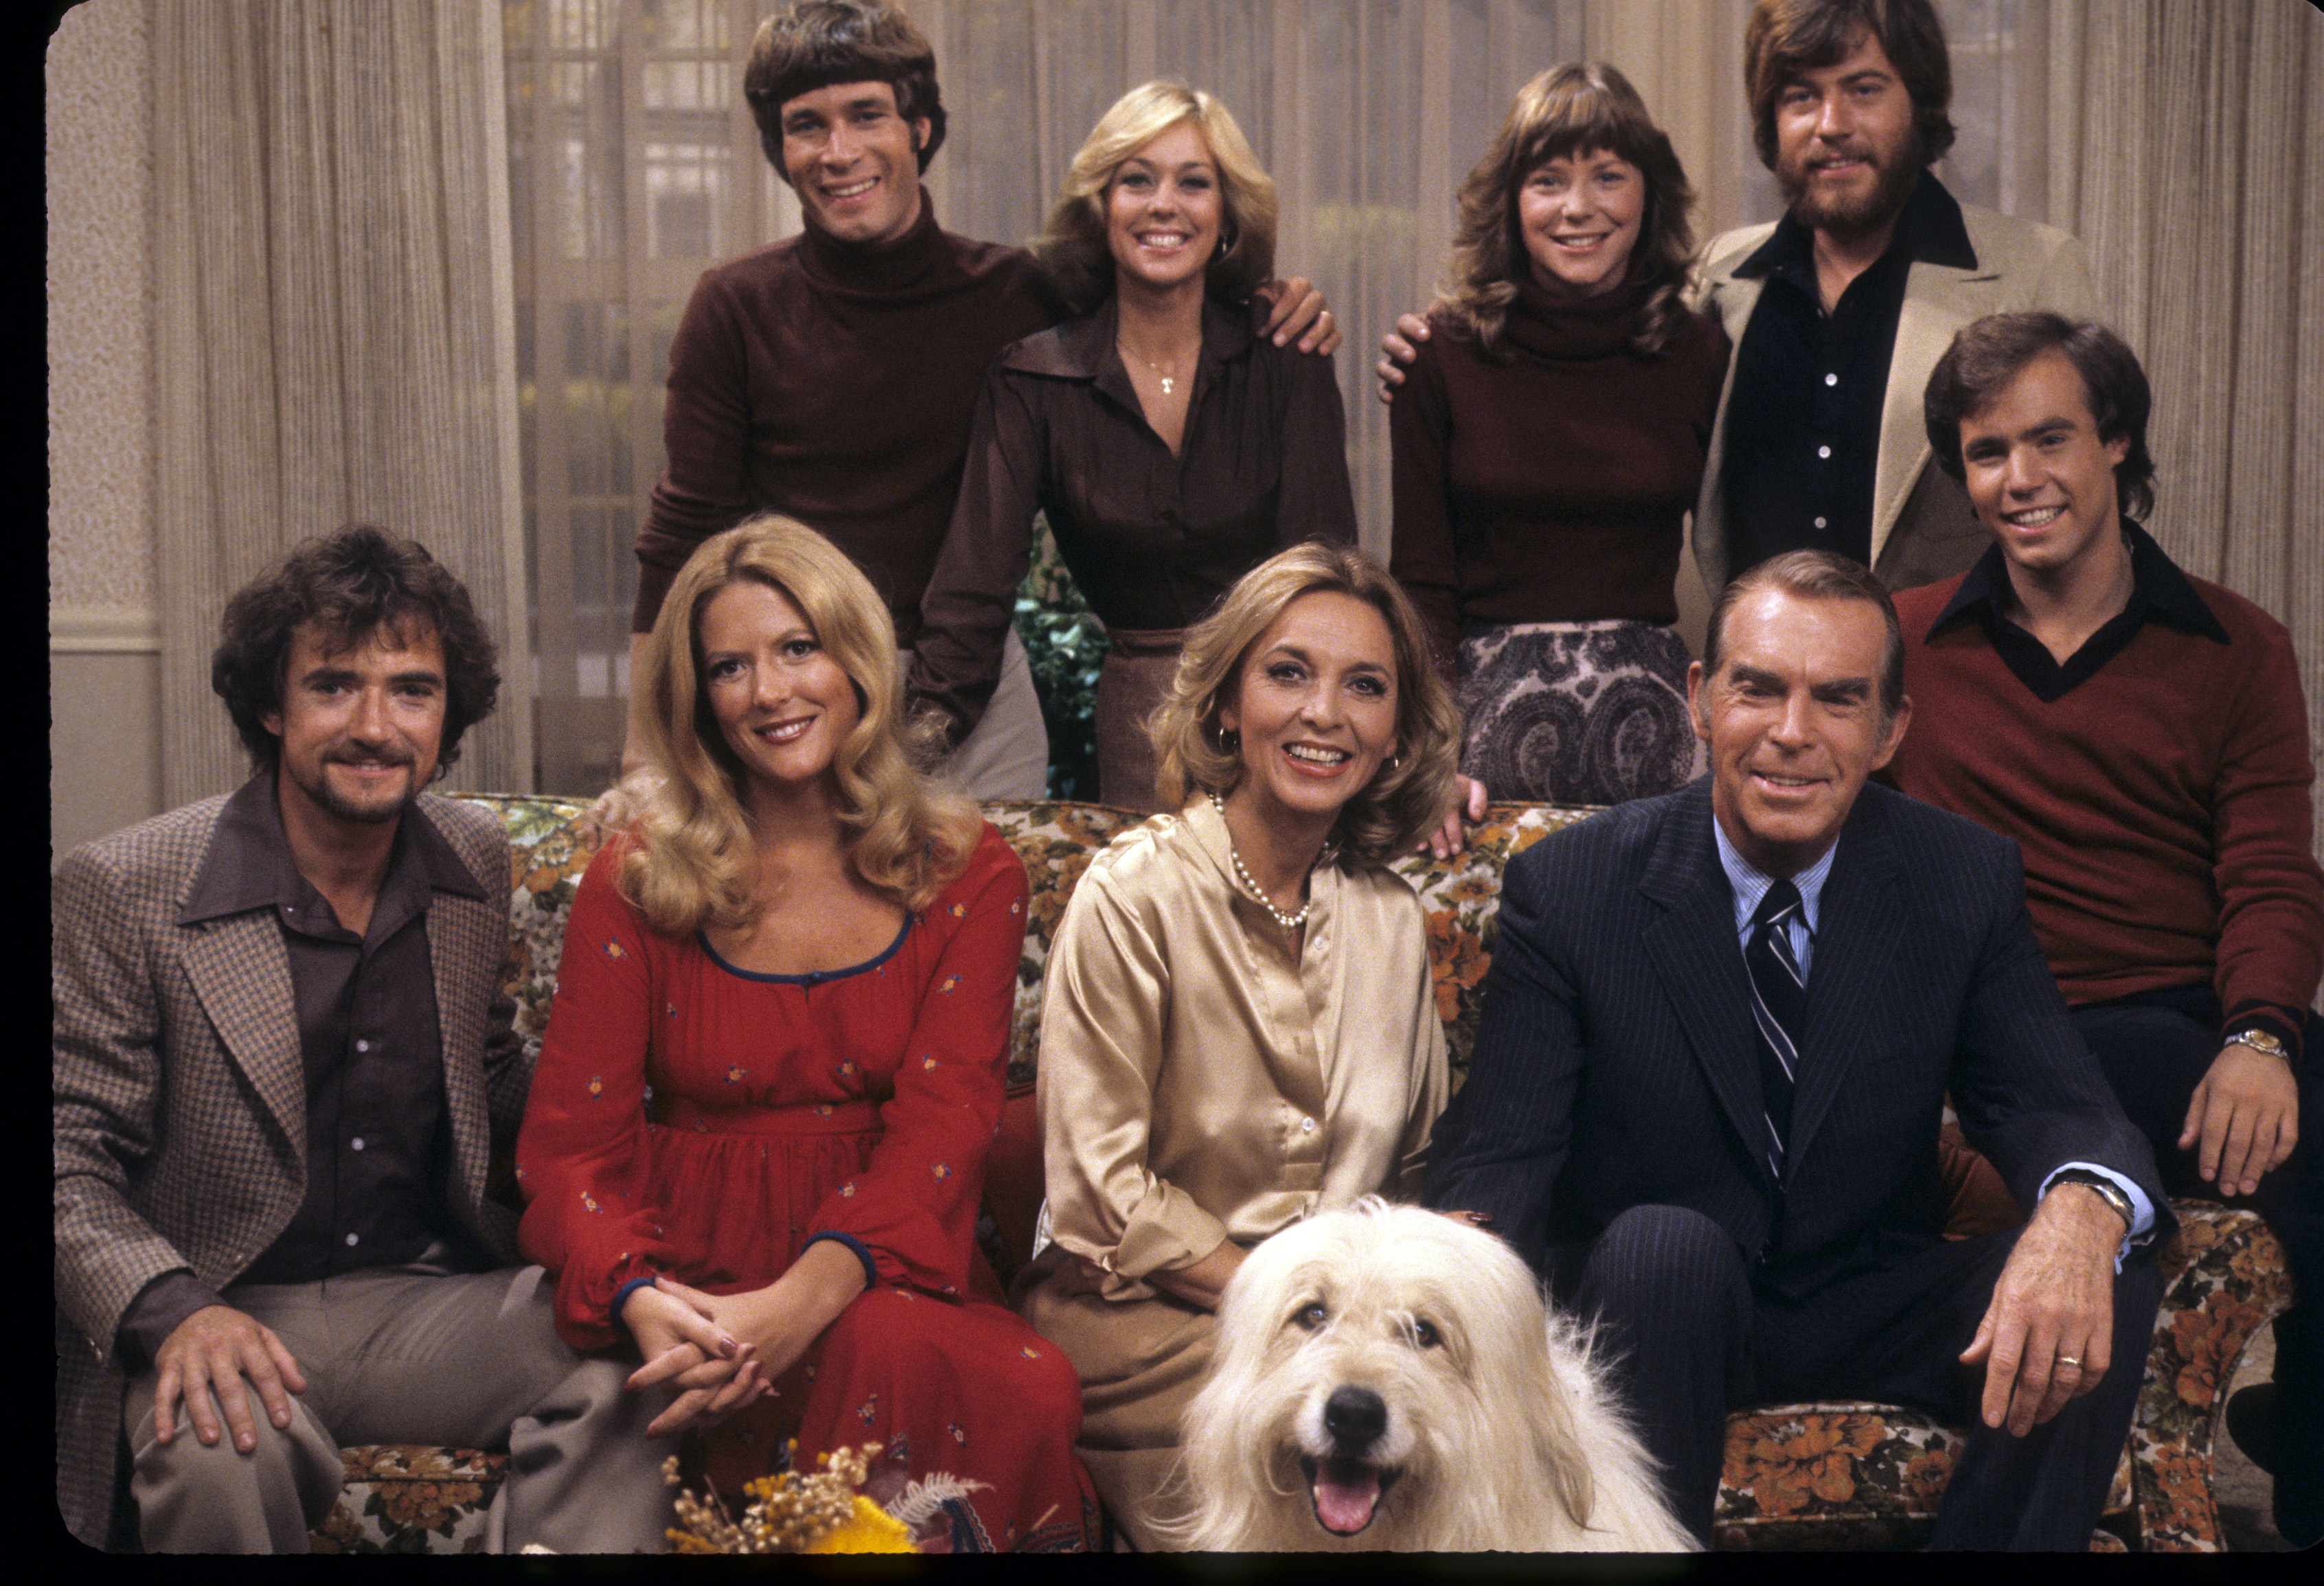 Don Grady and Tina Cole with the stars of "My Three Sons" and "The Patridge Family" on November 25, 1977 | Source: Getty Images